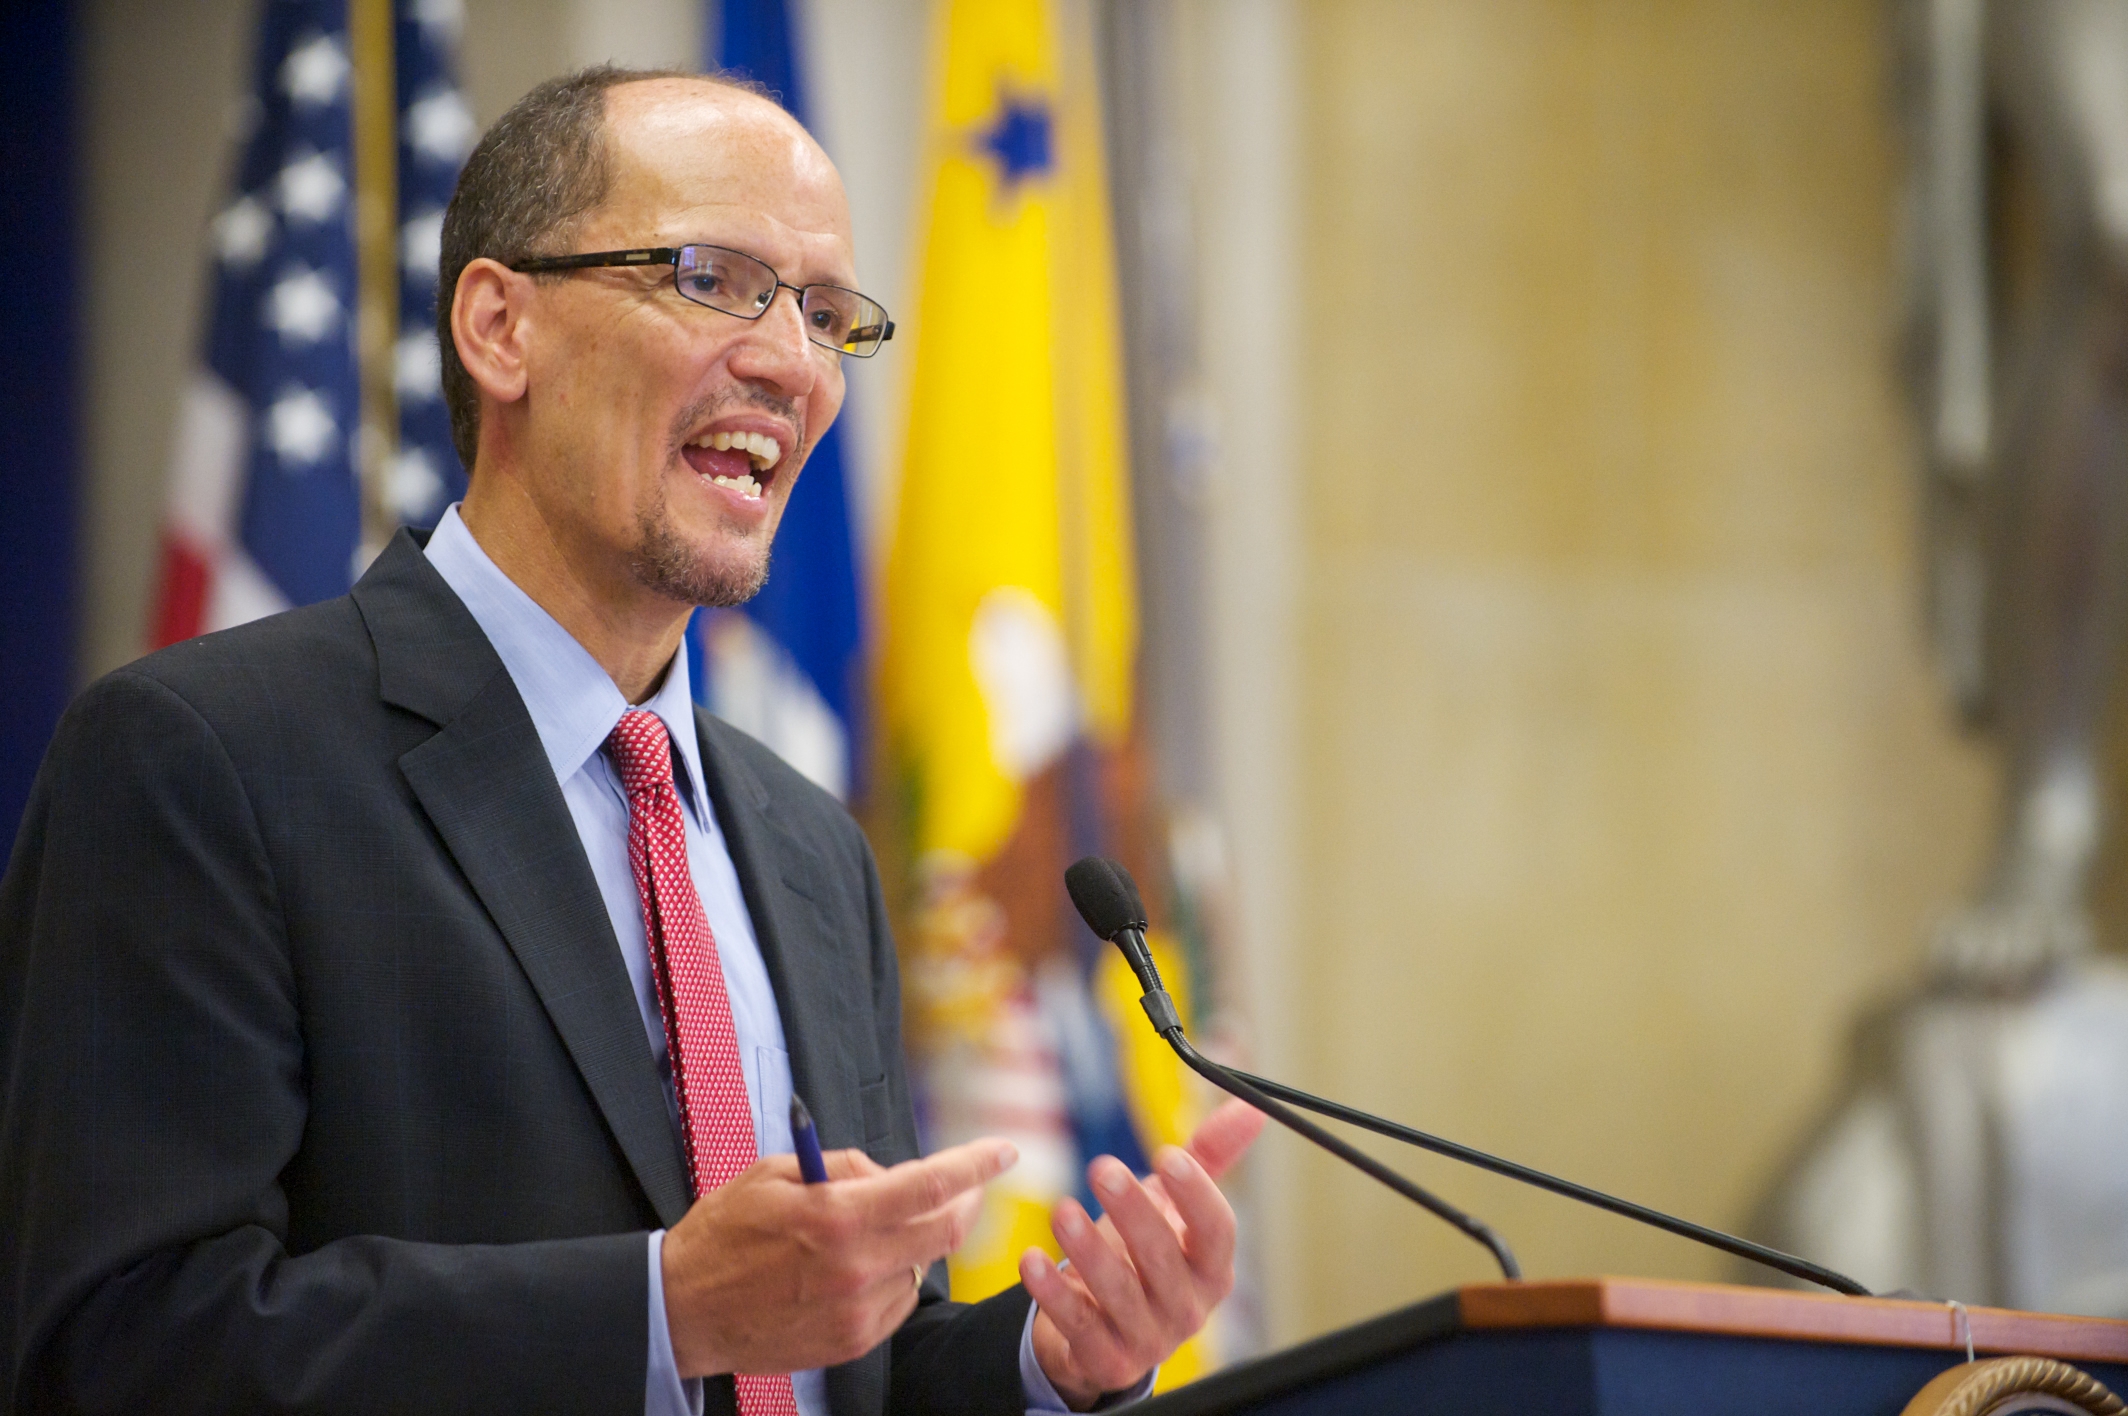 AAG Thomas Perez highlights several  accomplishments and current projects at DOJ